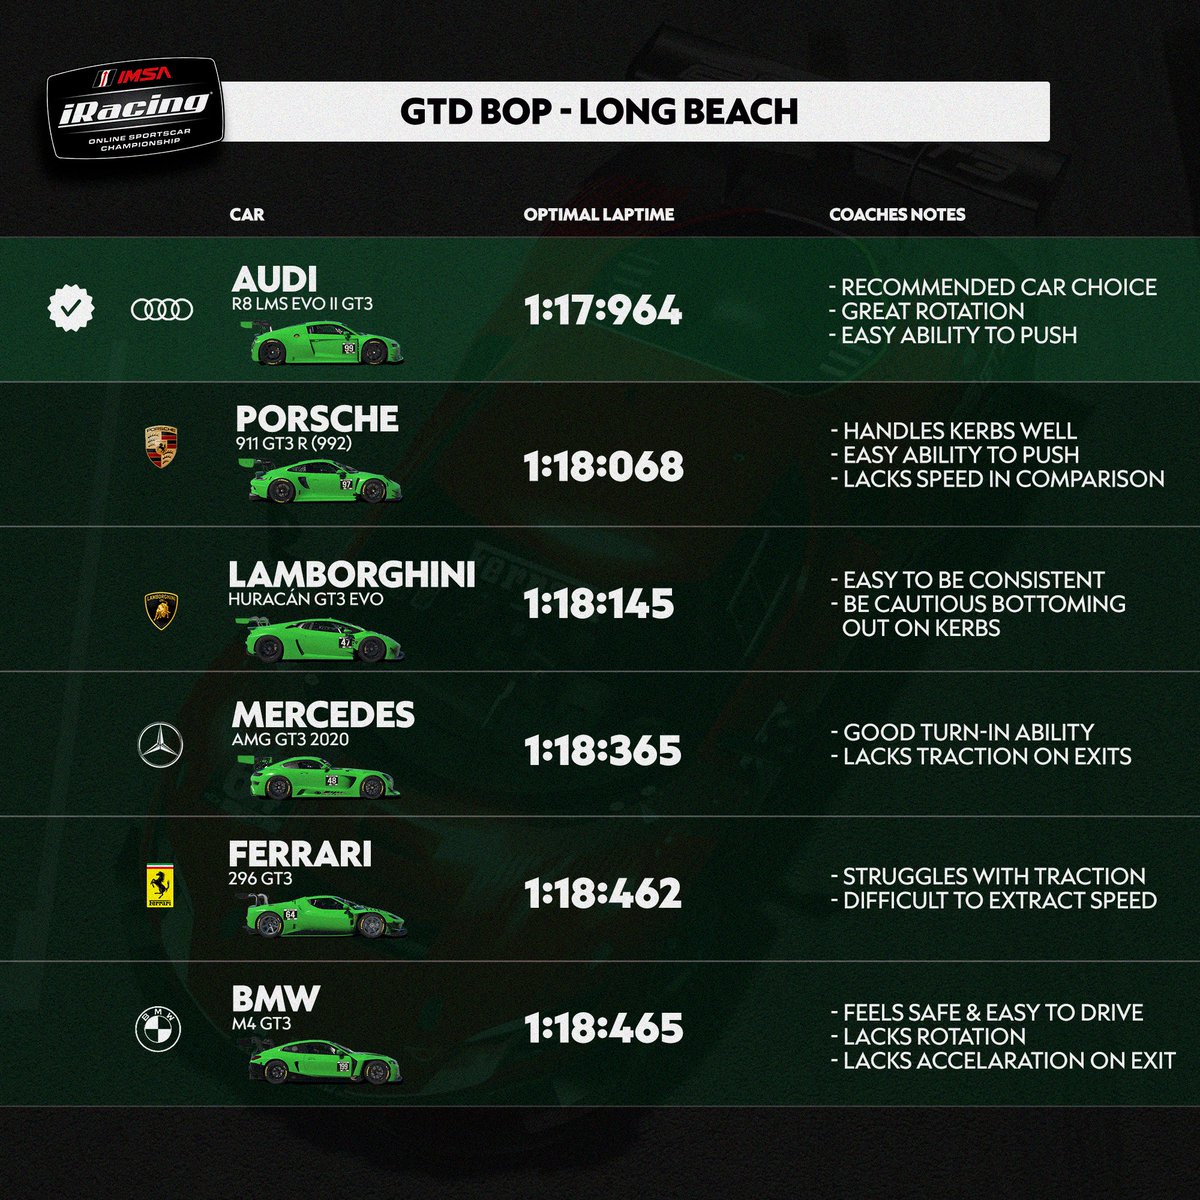 It's looking fairly close this week! 🤏 Results from our BoP testing as IMSA iRacing Series heads to Long Beach for the Week 4️⃣! ⏰ GTD - Sunday, 11:00 GMT ⏰ GTP - Monday, 18:00 GMT 📺 twitch.tv/apexracingteam #apexracingacademy #iracing